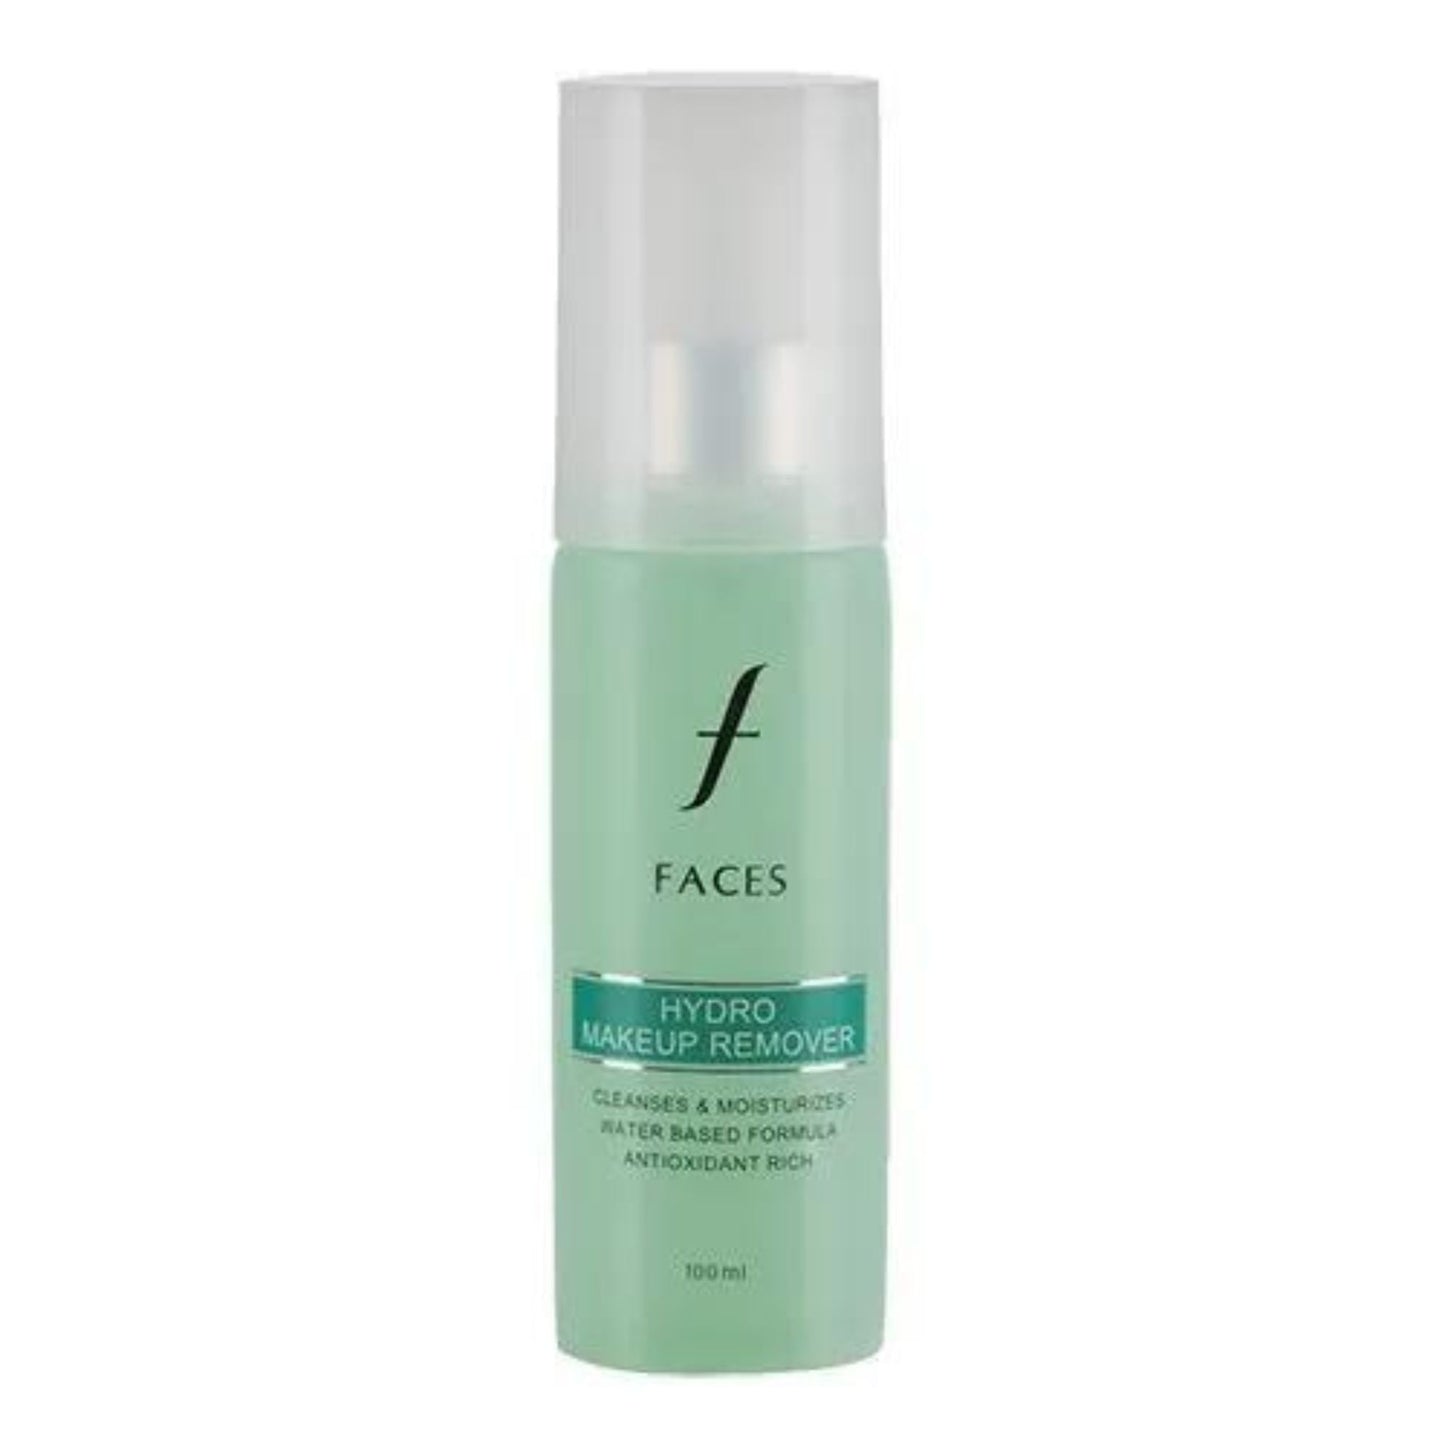 Faces Hydro Makeup Remover, 100 ml